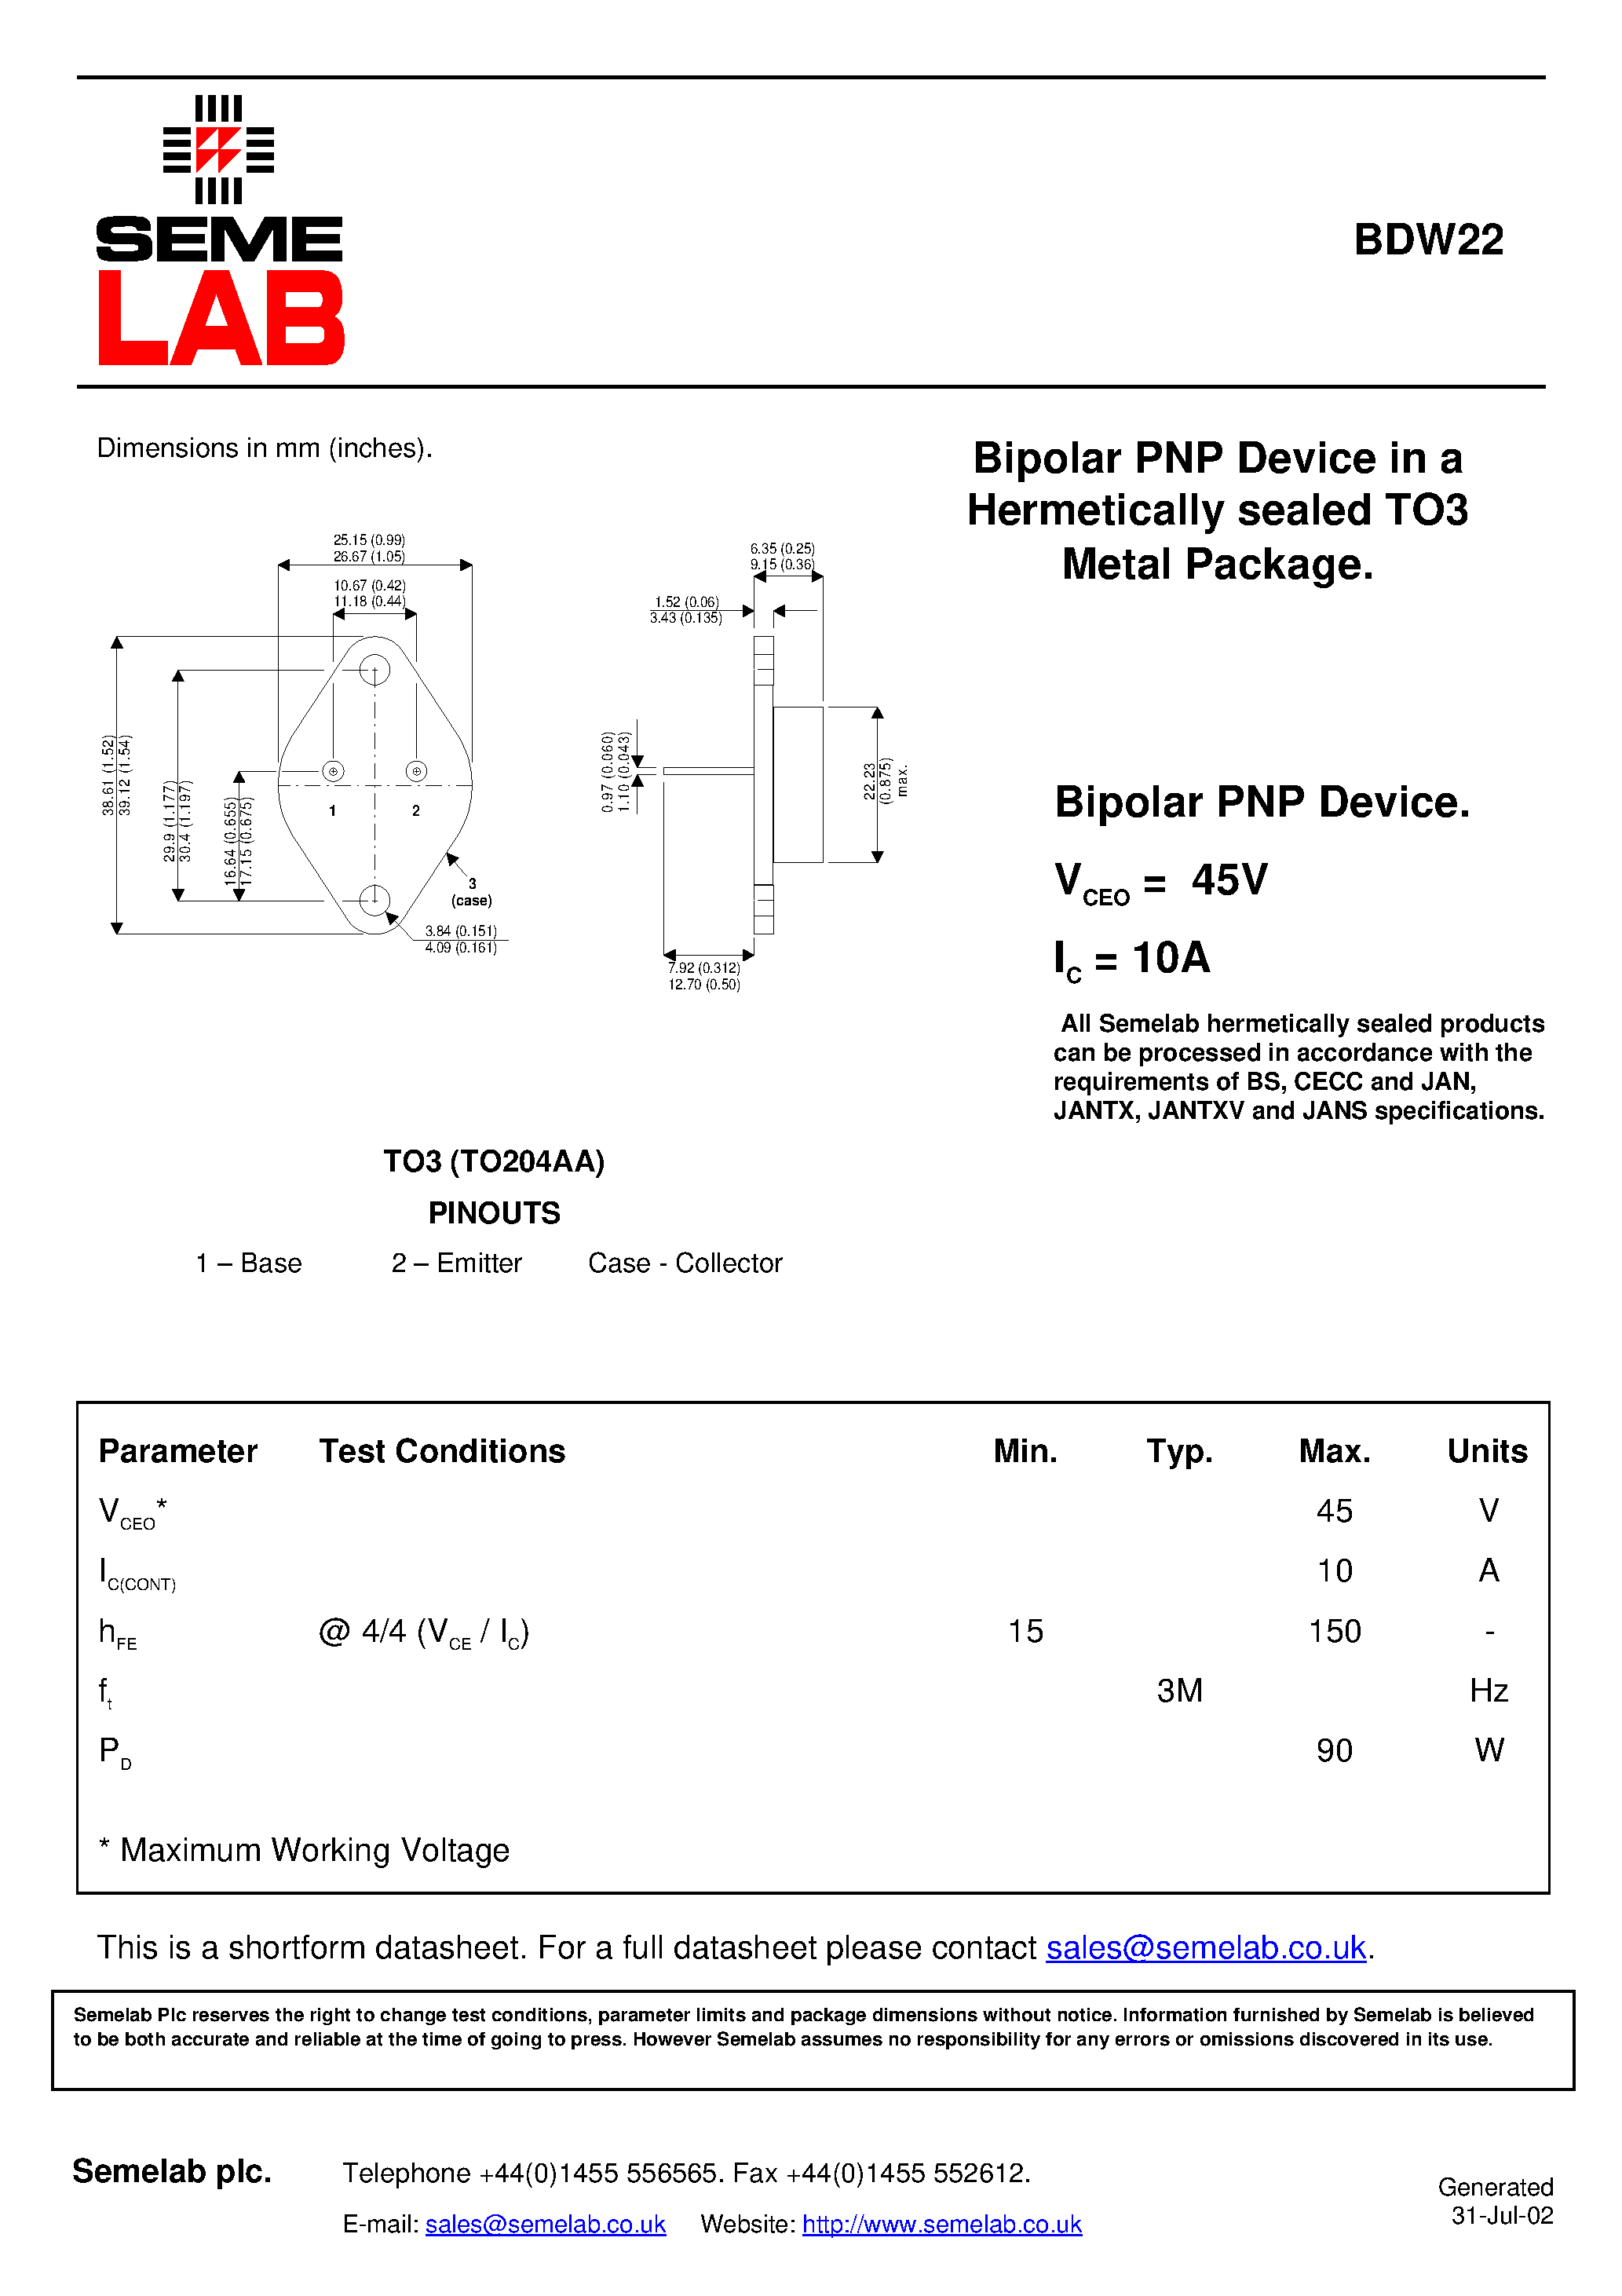 Datasheet BDW22 - Bipolar PNP Device in a Hermetically sealed TO3 Metal Package page 1